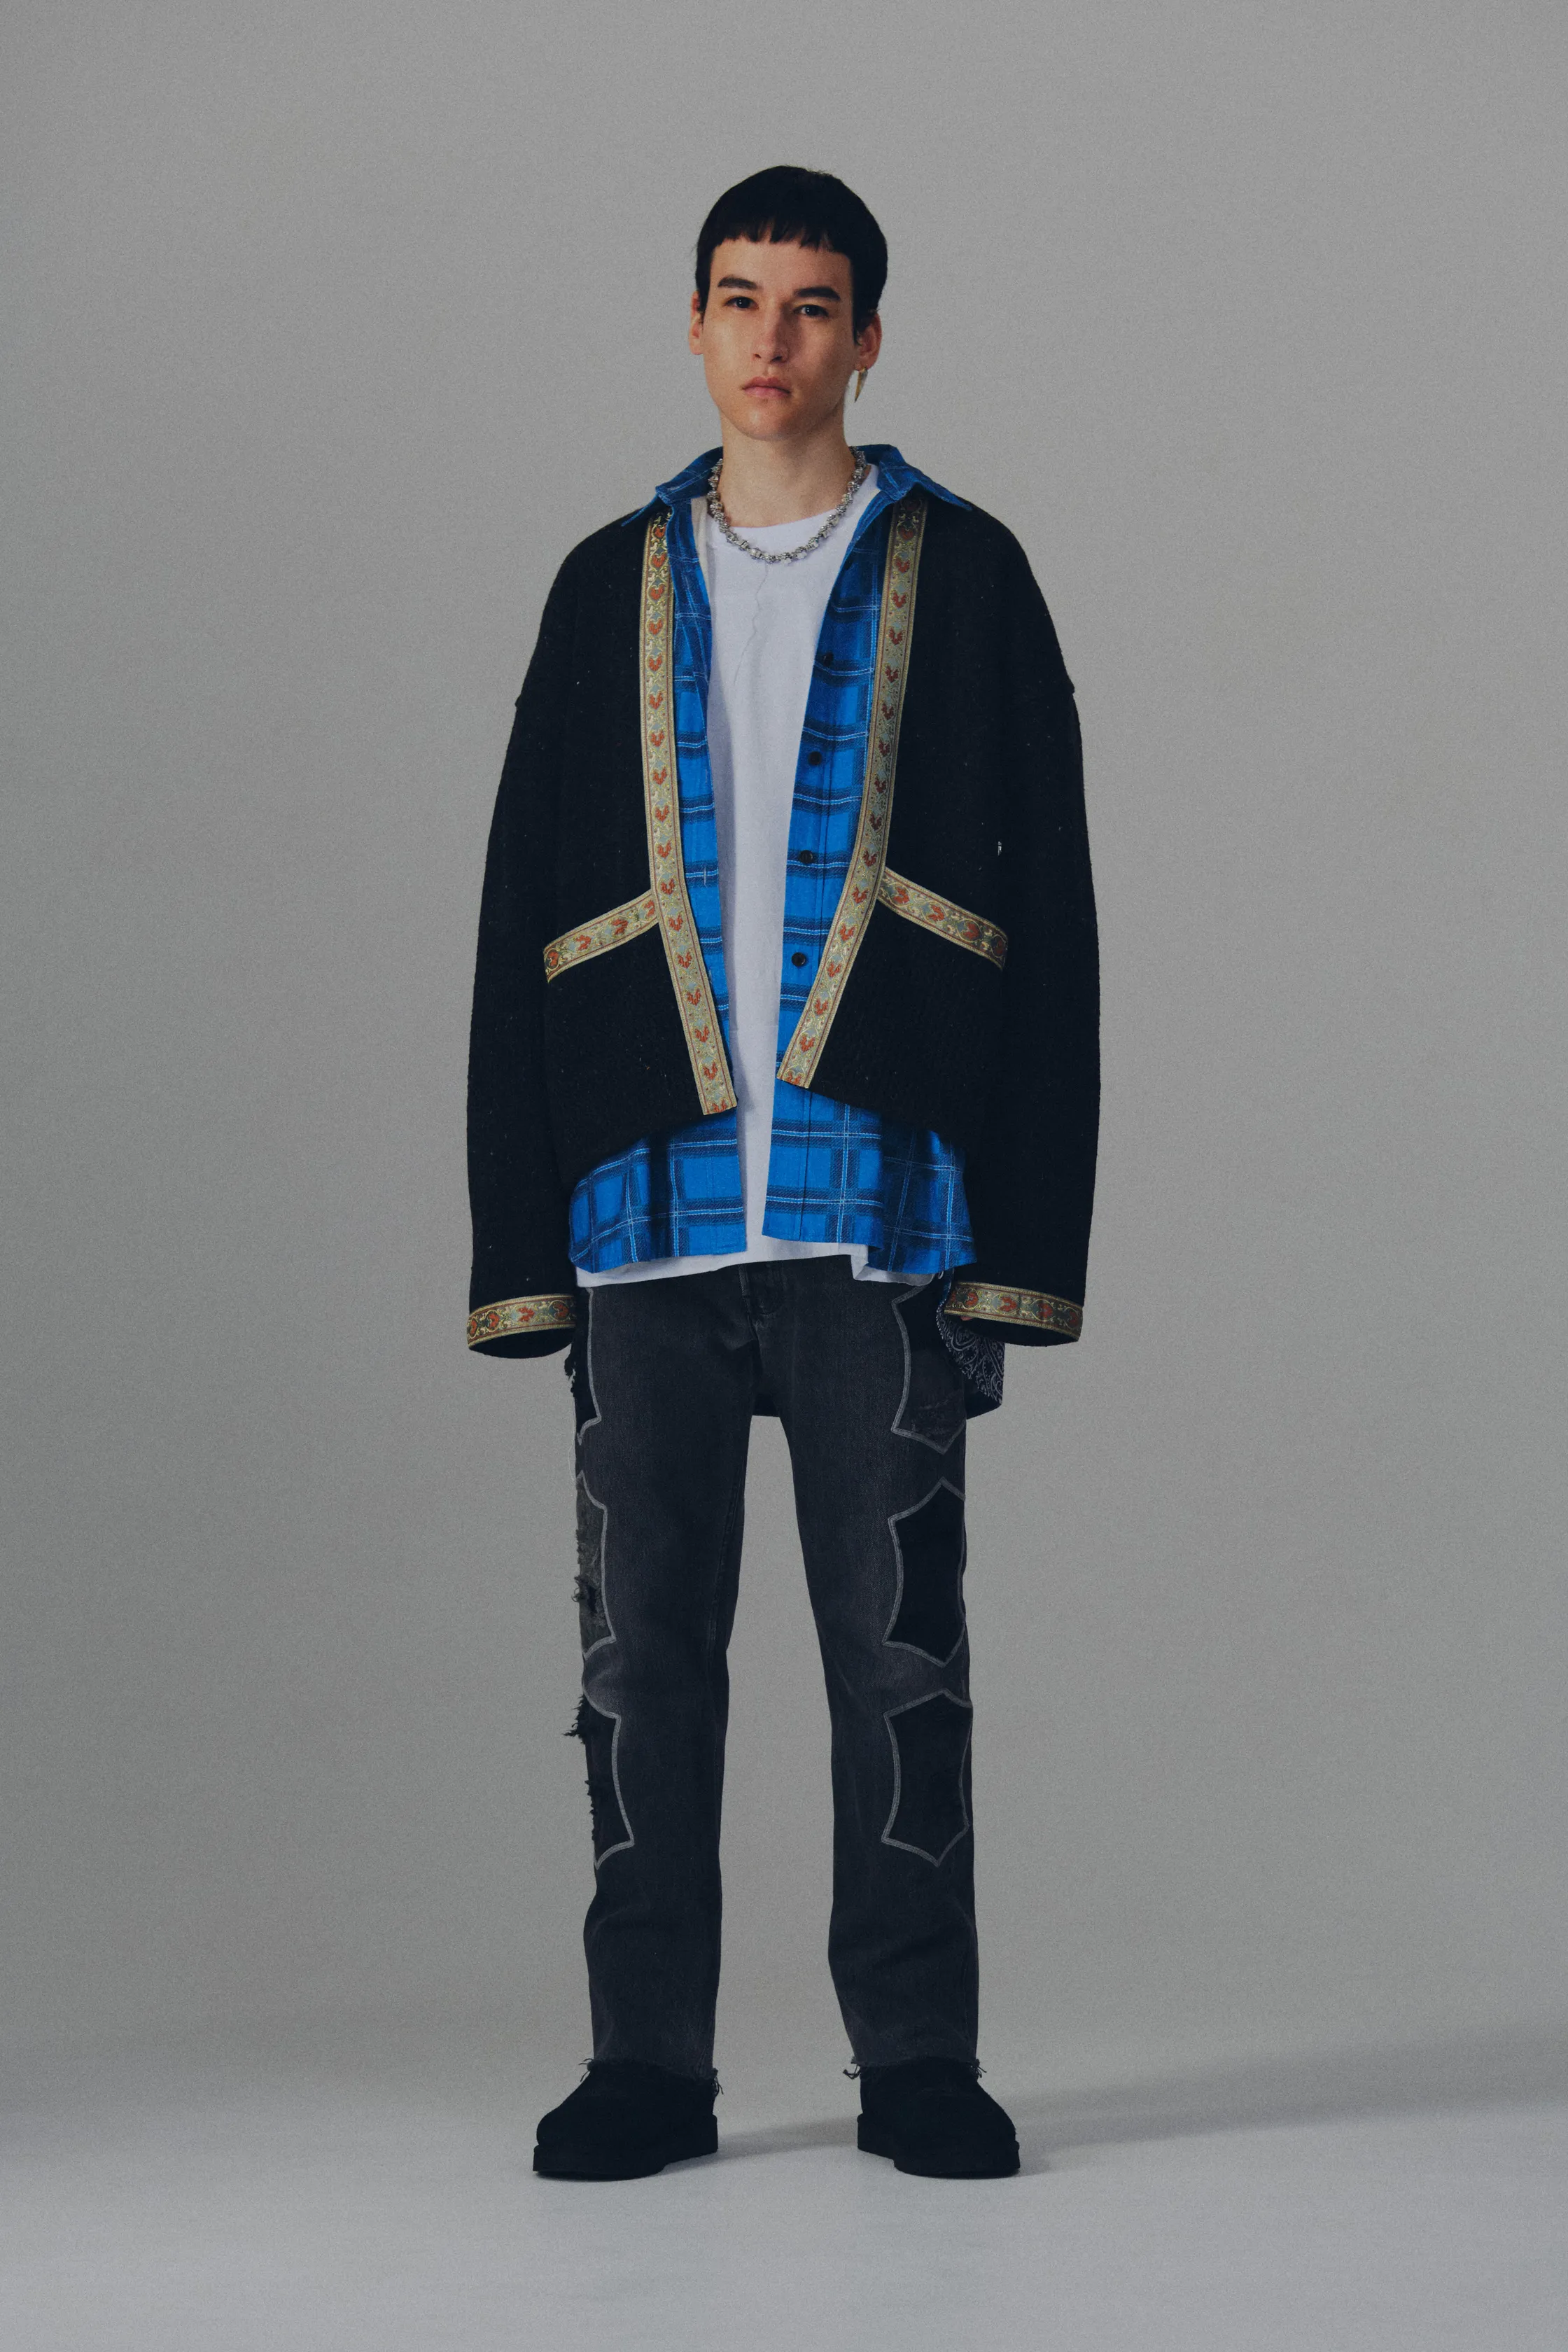 00033-Children-of-the-Discordance-Mens-Fall-22-credit-brand.png